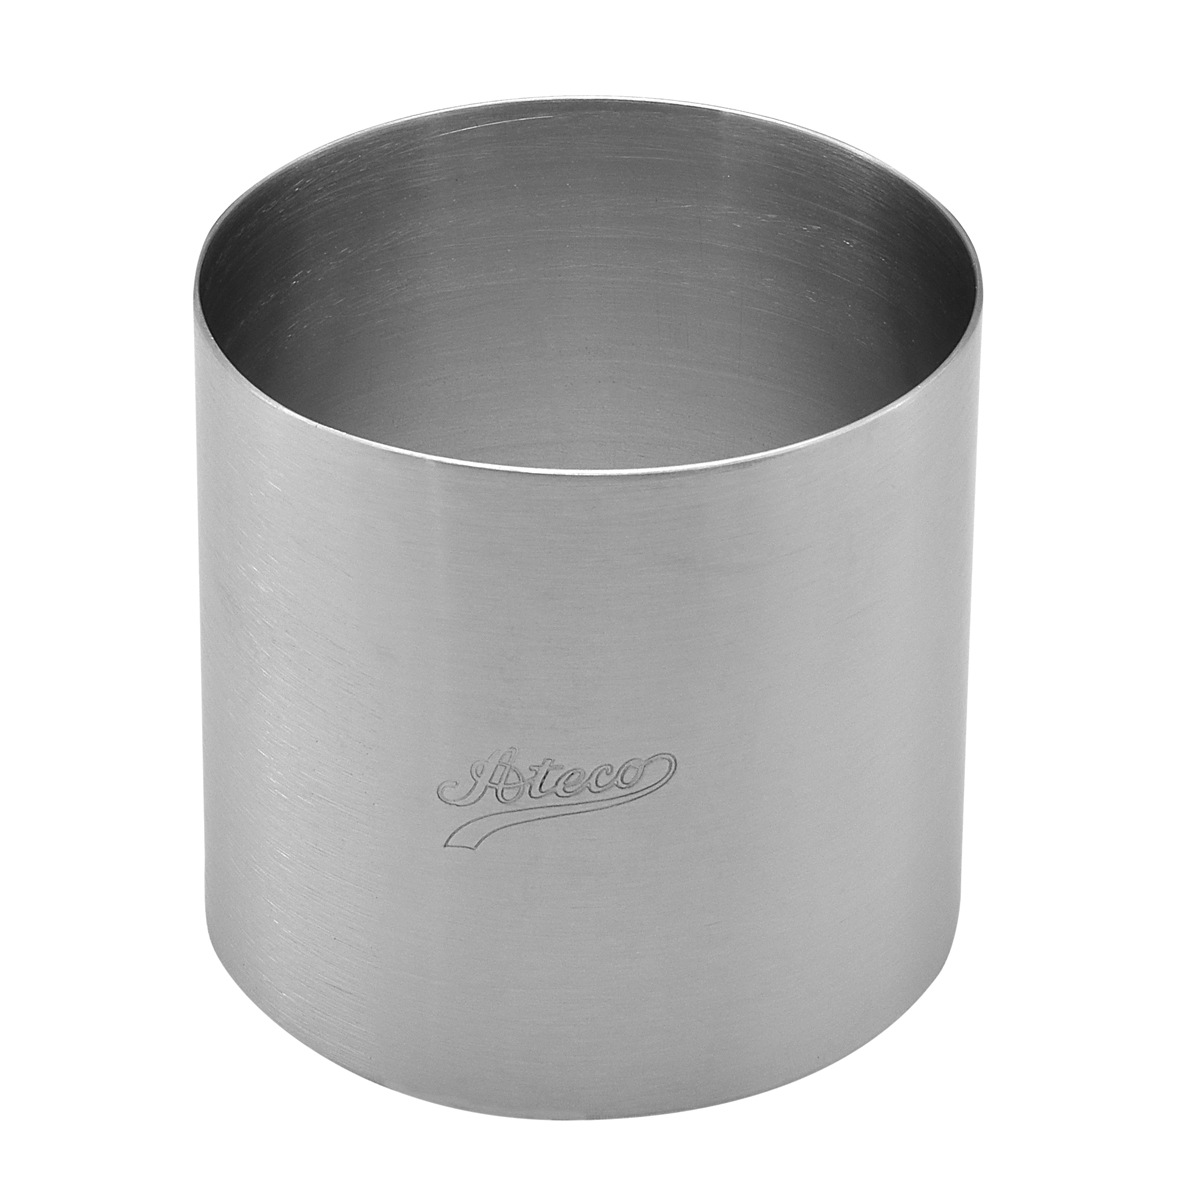 Ateco Stainless Steel Round Cake Ring, 3-1/8" x 3" High